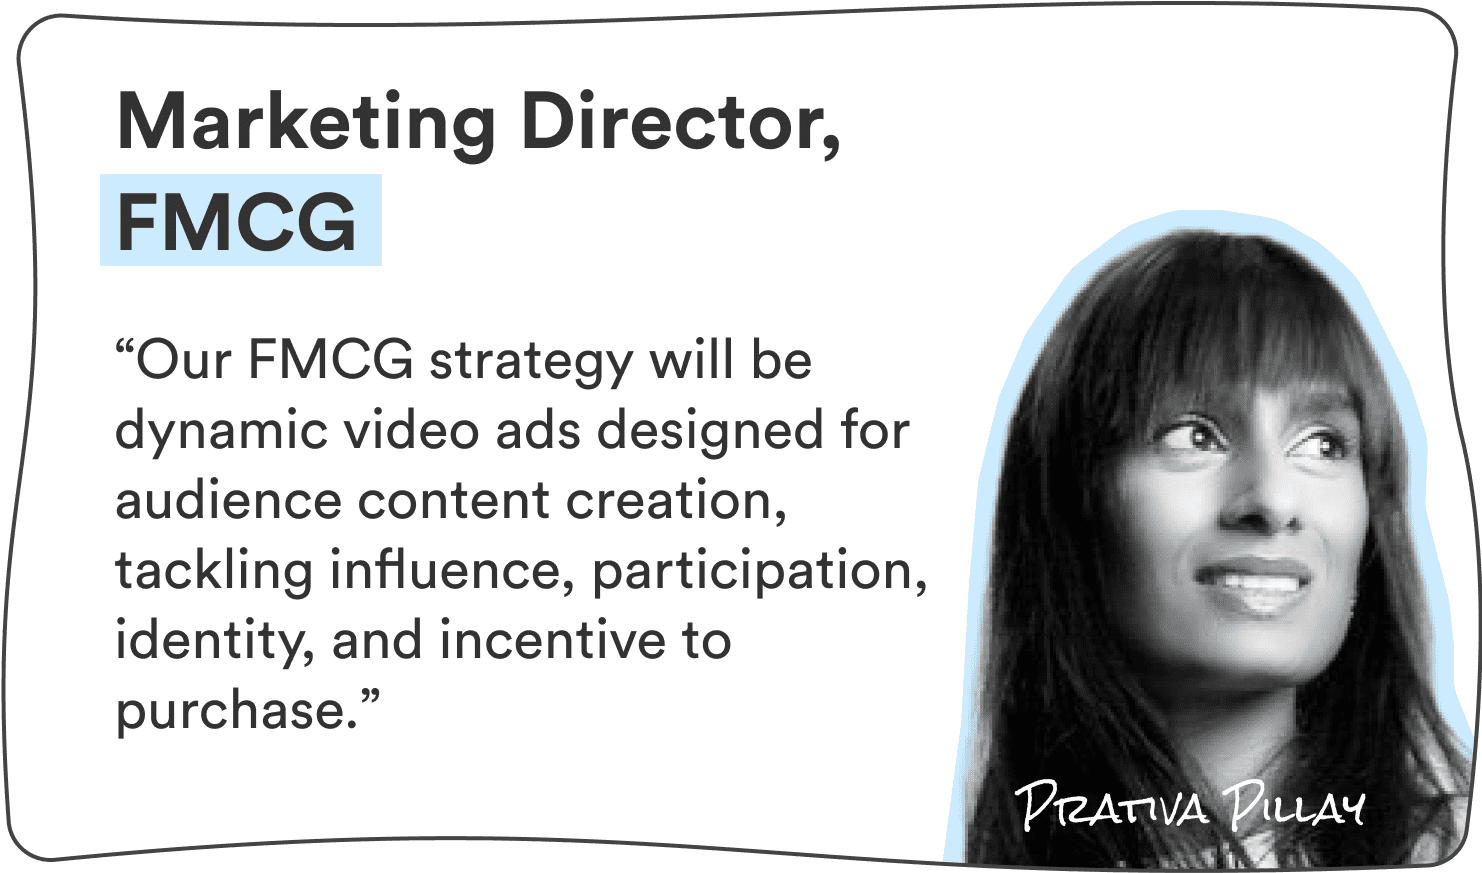 Prativa Pillay, Marketing Director at FCMG: “Our FMCG strategy will be dynamic video ads designed for audience content creation, tackling influence, participation, identity, and incentive to purchase.”